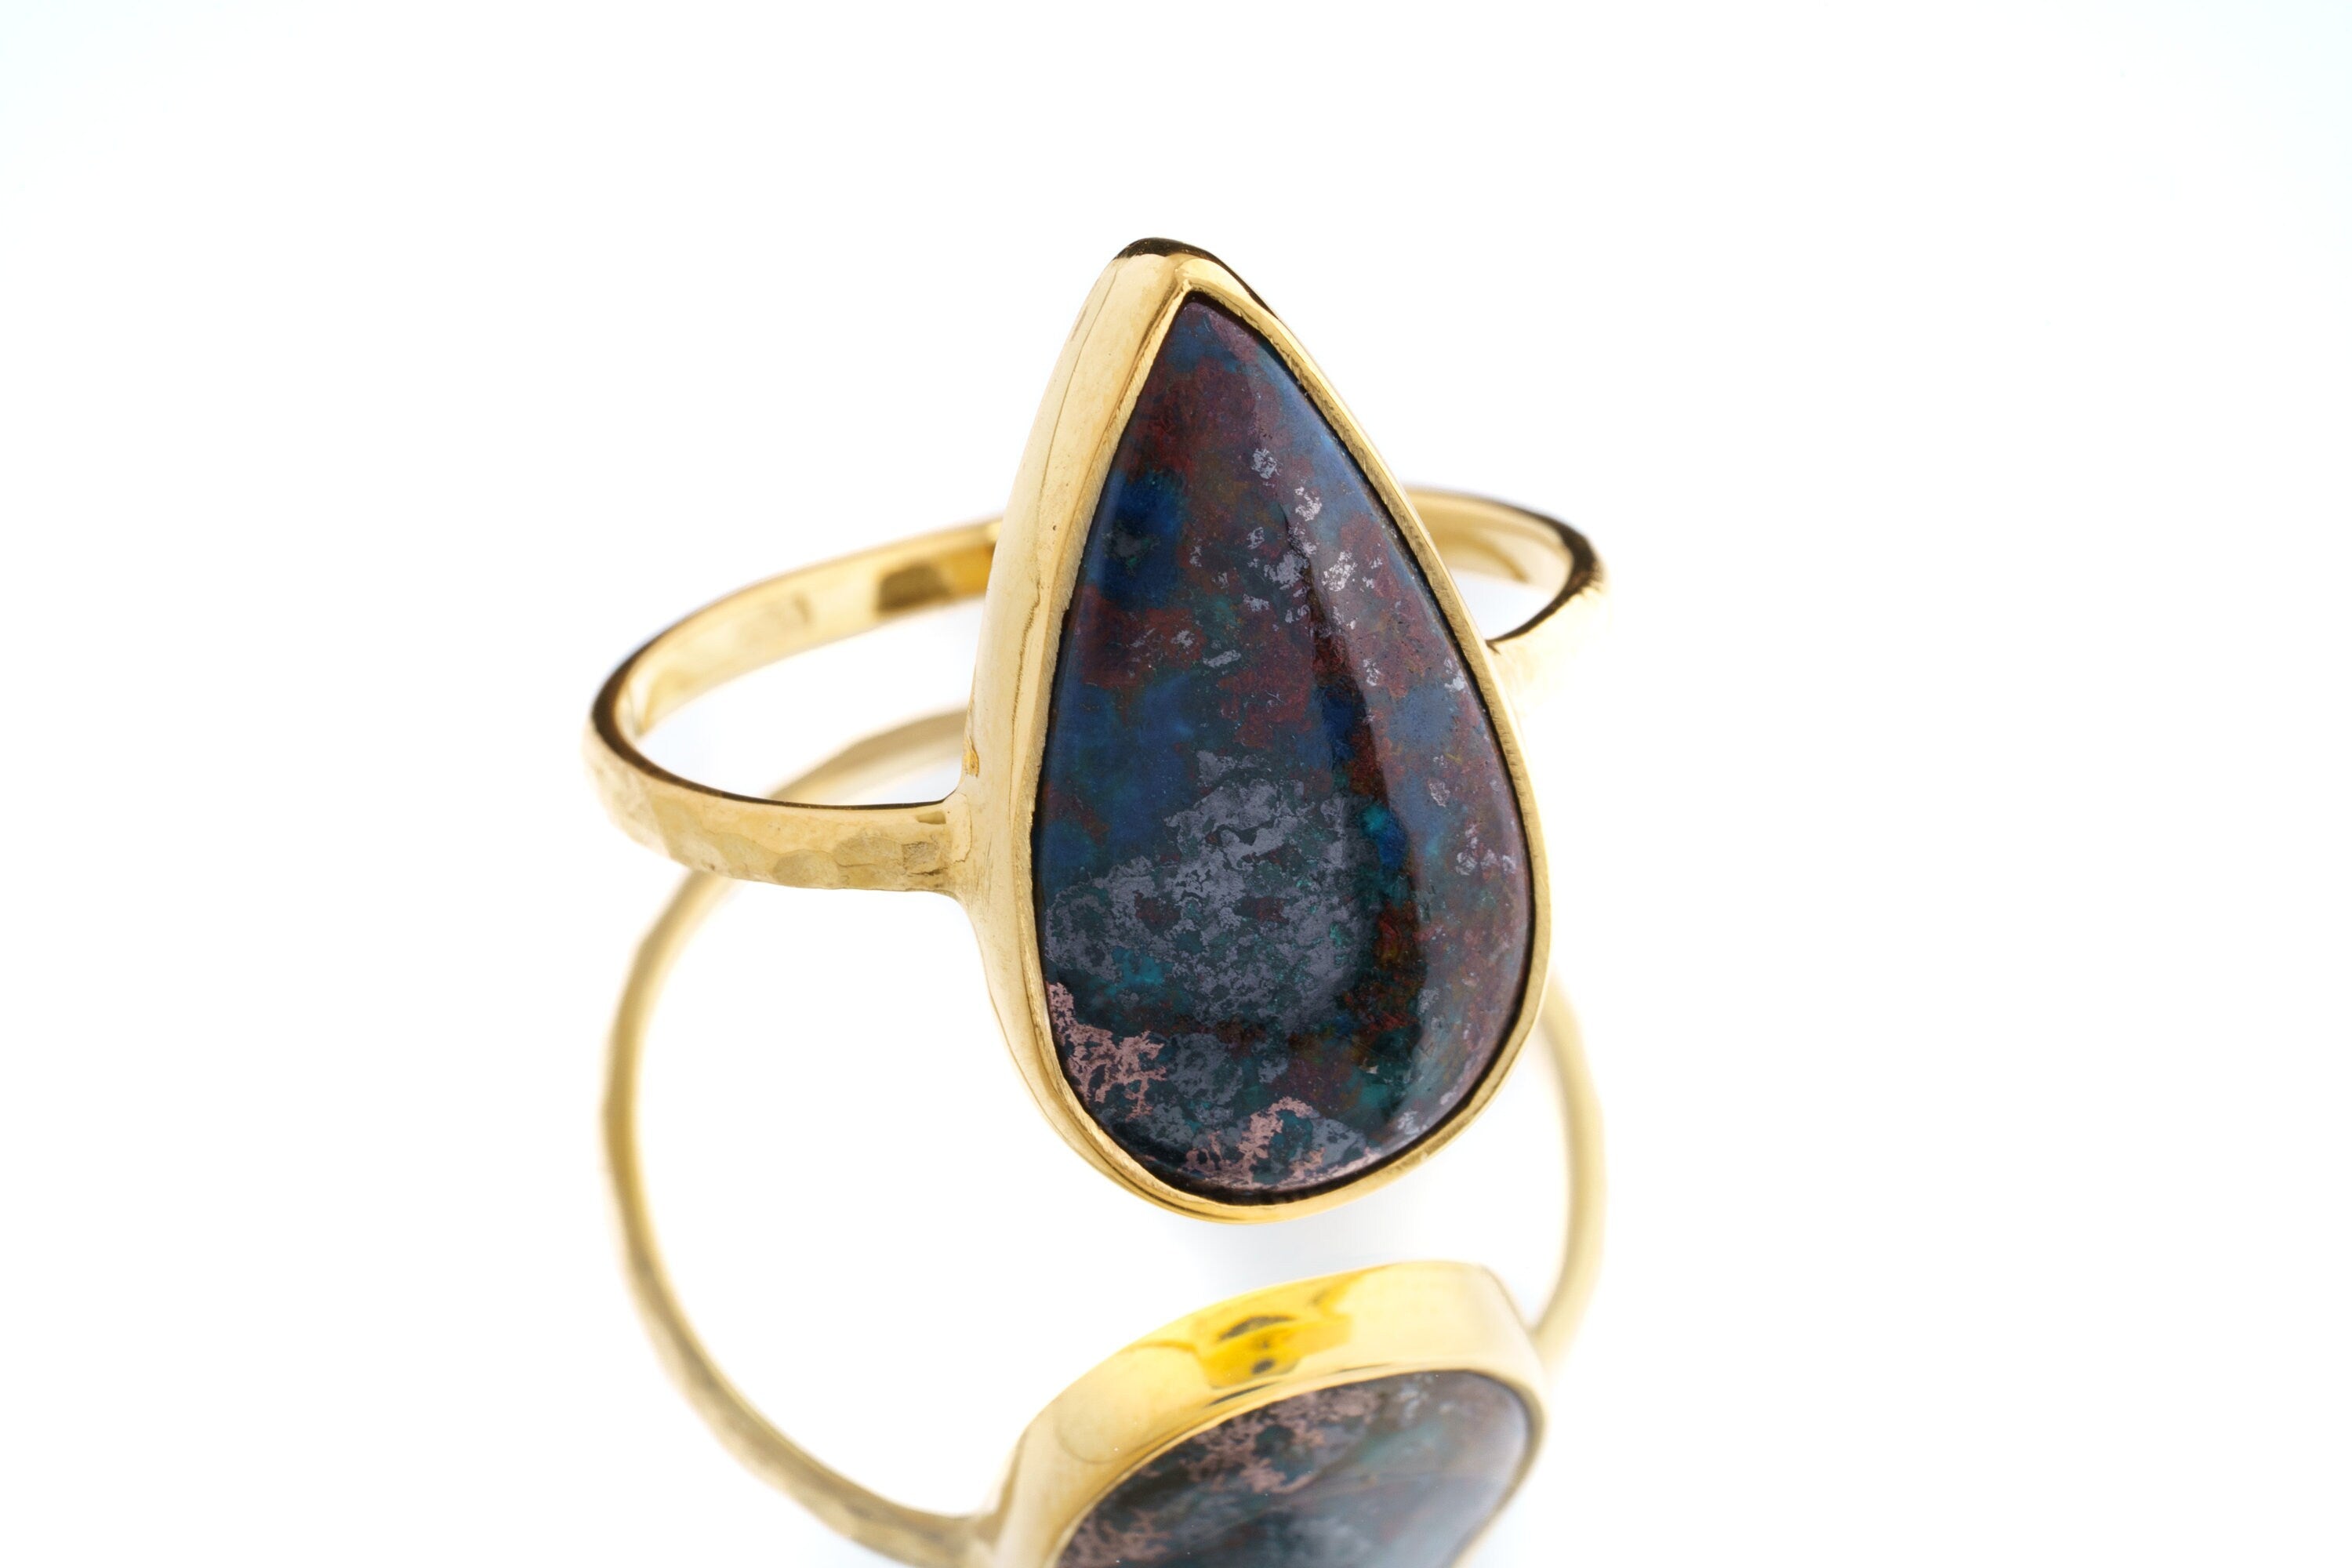 Copper rich Azurite Tear Drop Cabochon - Stack Crystal Ring - Size 7 1/2 US - Gold Plated 925 Sterling Silver - Thin Band Hammer Textured